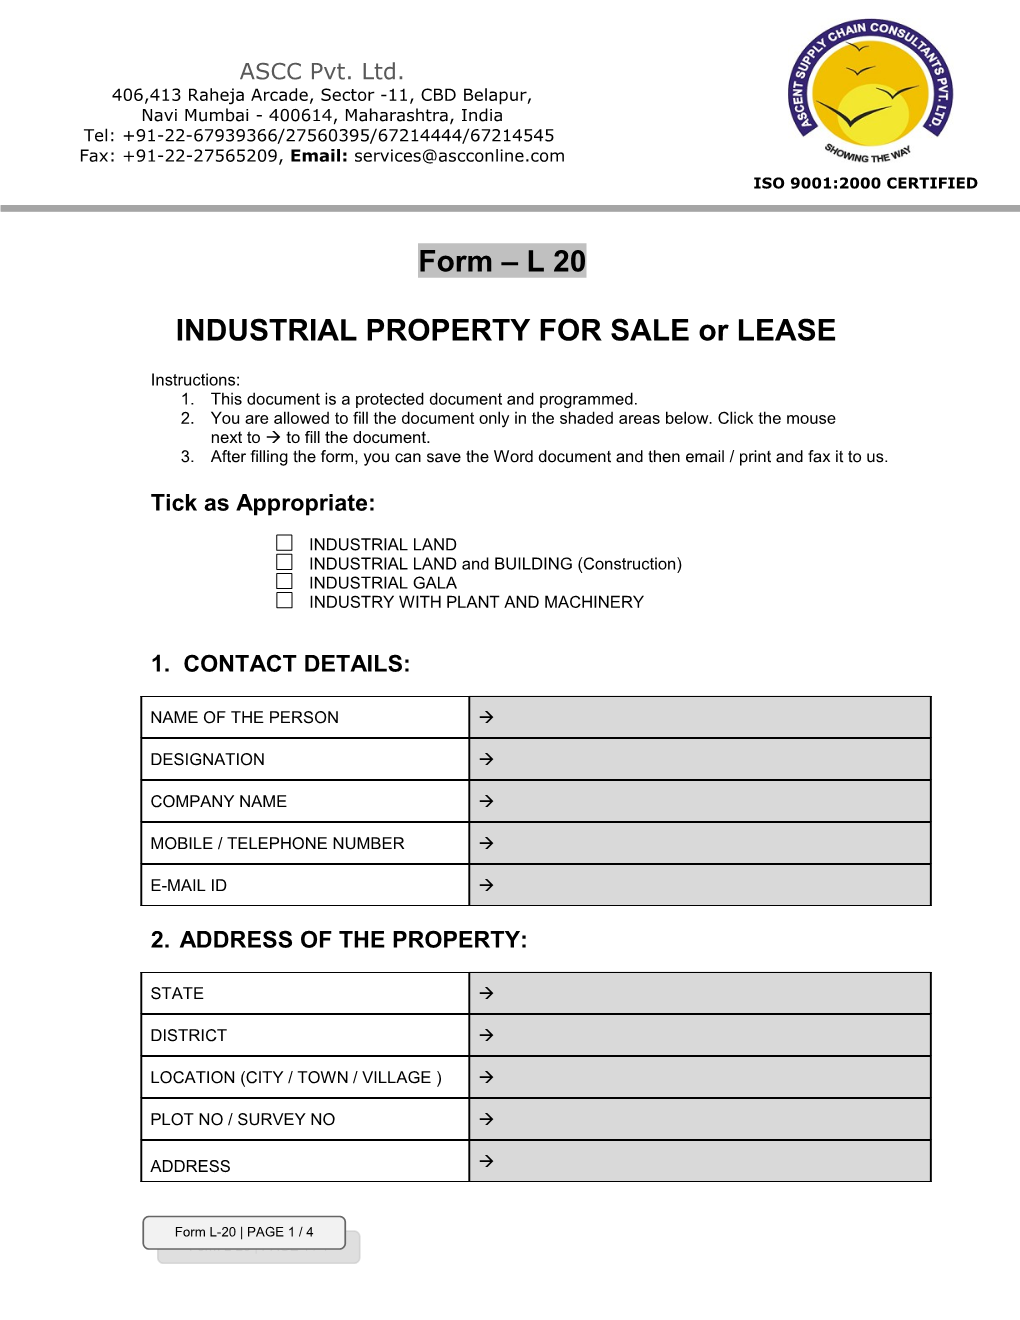 INDUSTRIAL PROPERTY for SALE Or LEASE